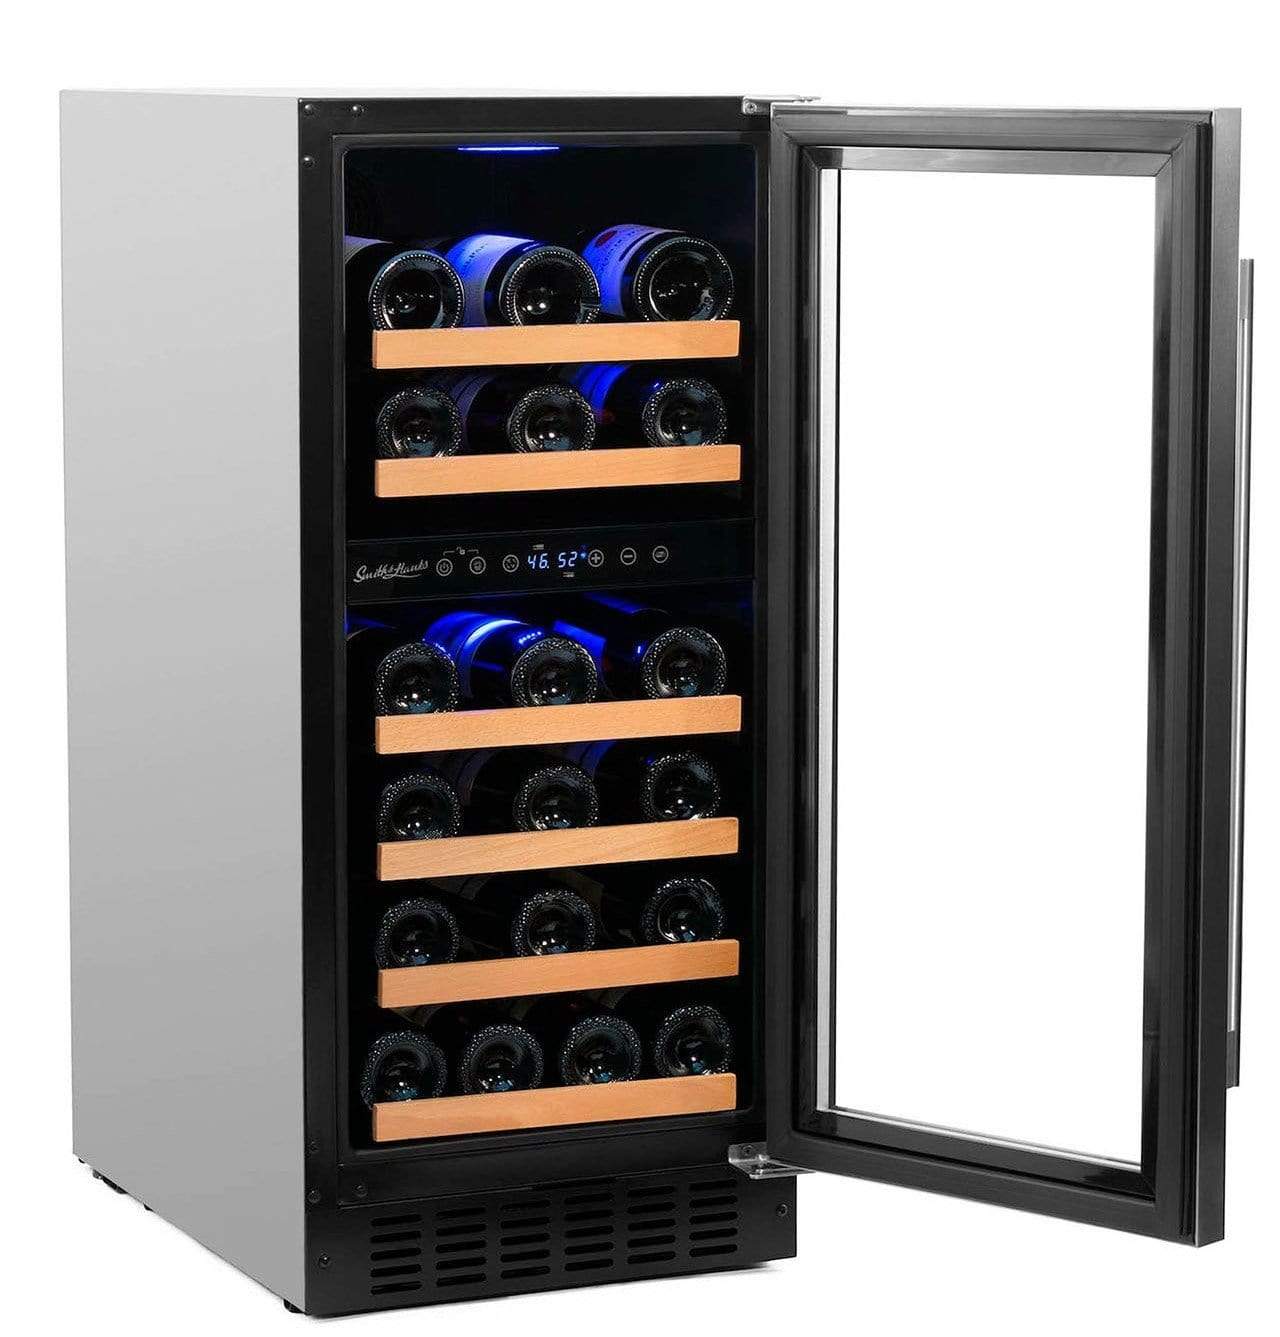 Smith & Hanks 32 Bottle Dual Zone Stainless Steel Wine Fridge RW88DR Wine Coolers Empire